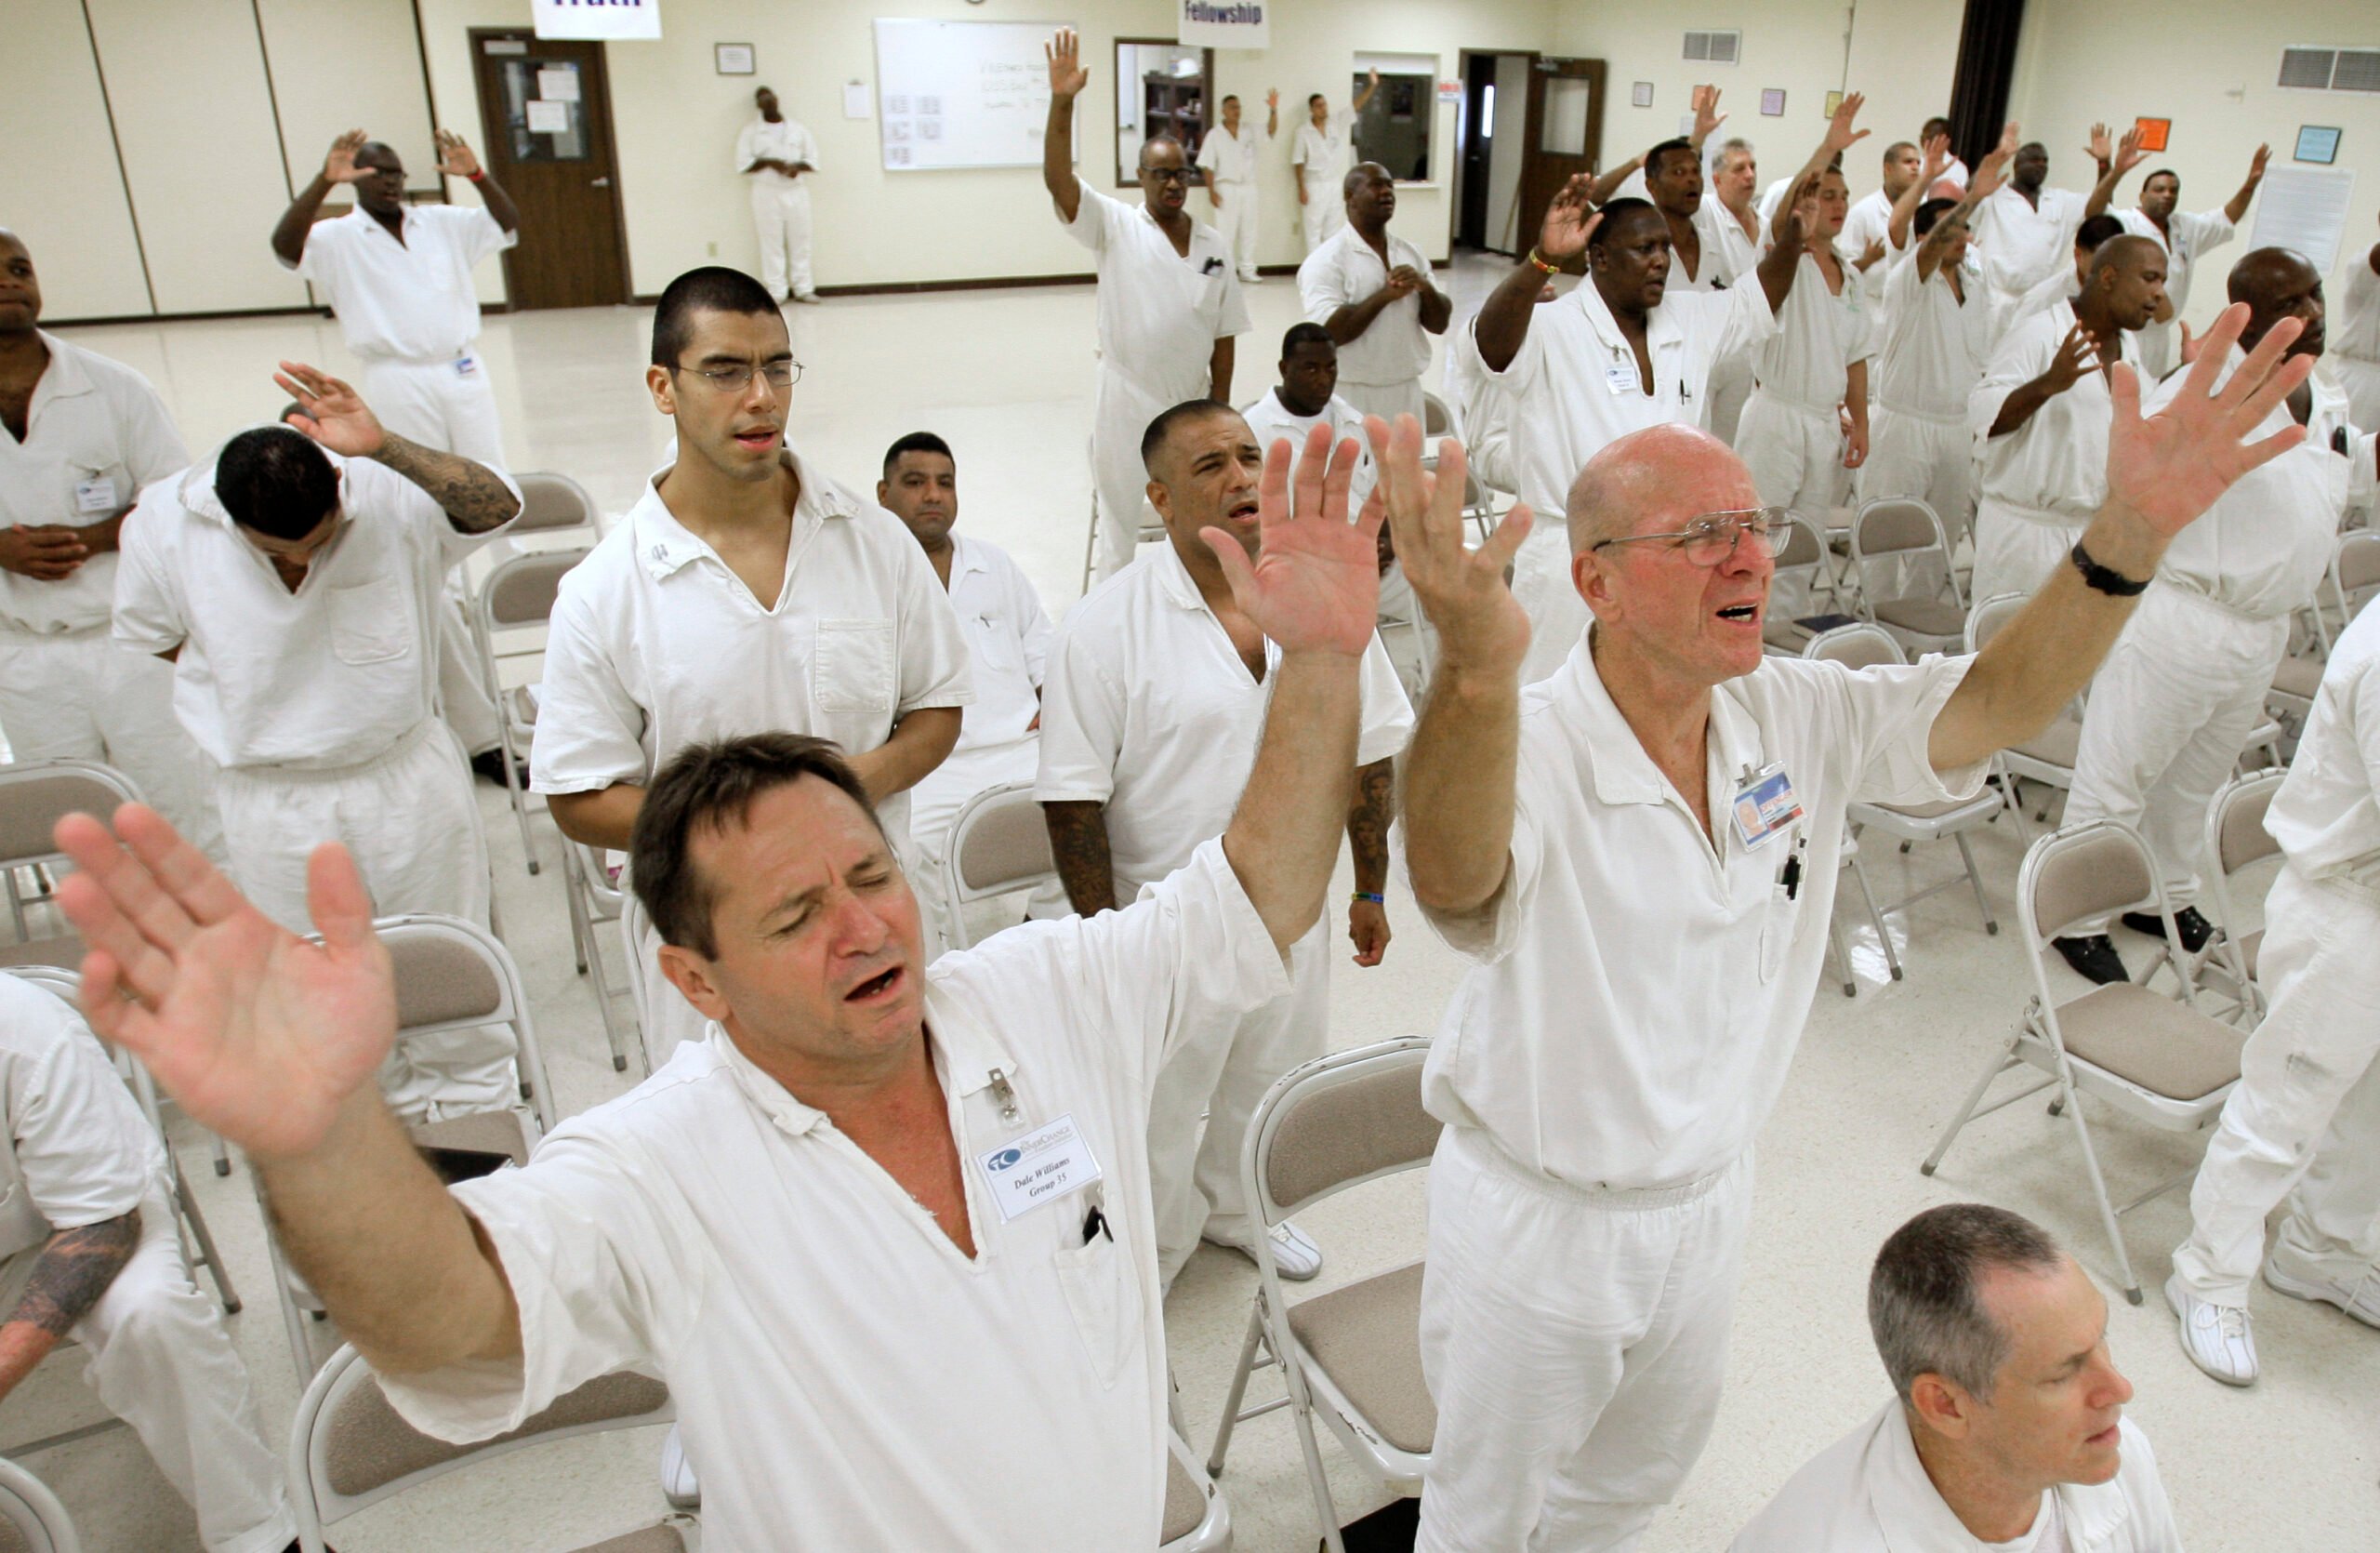 Male inmates in white prison uniforms stand near rows of folding chairs. Their arms are raised with expressions of praise, worship and focus on their faces. The crowd looks diverse with both Black, white and Latino worshipers.